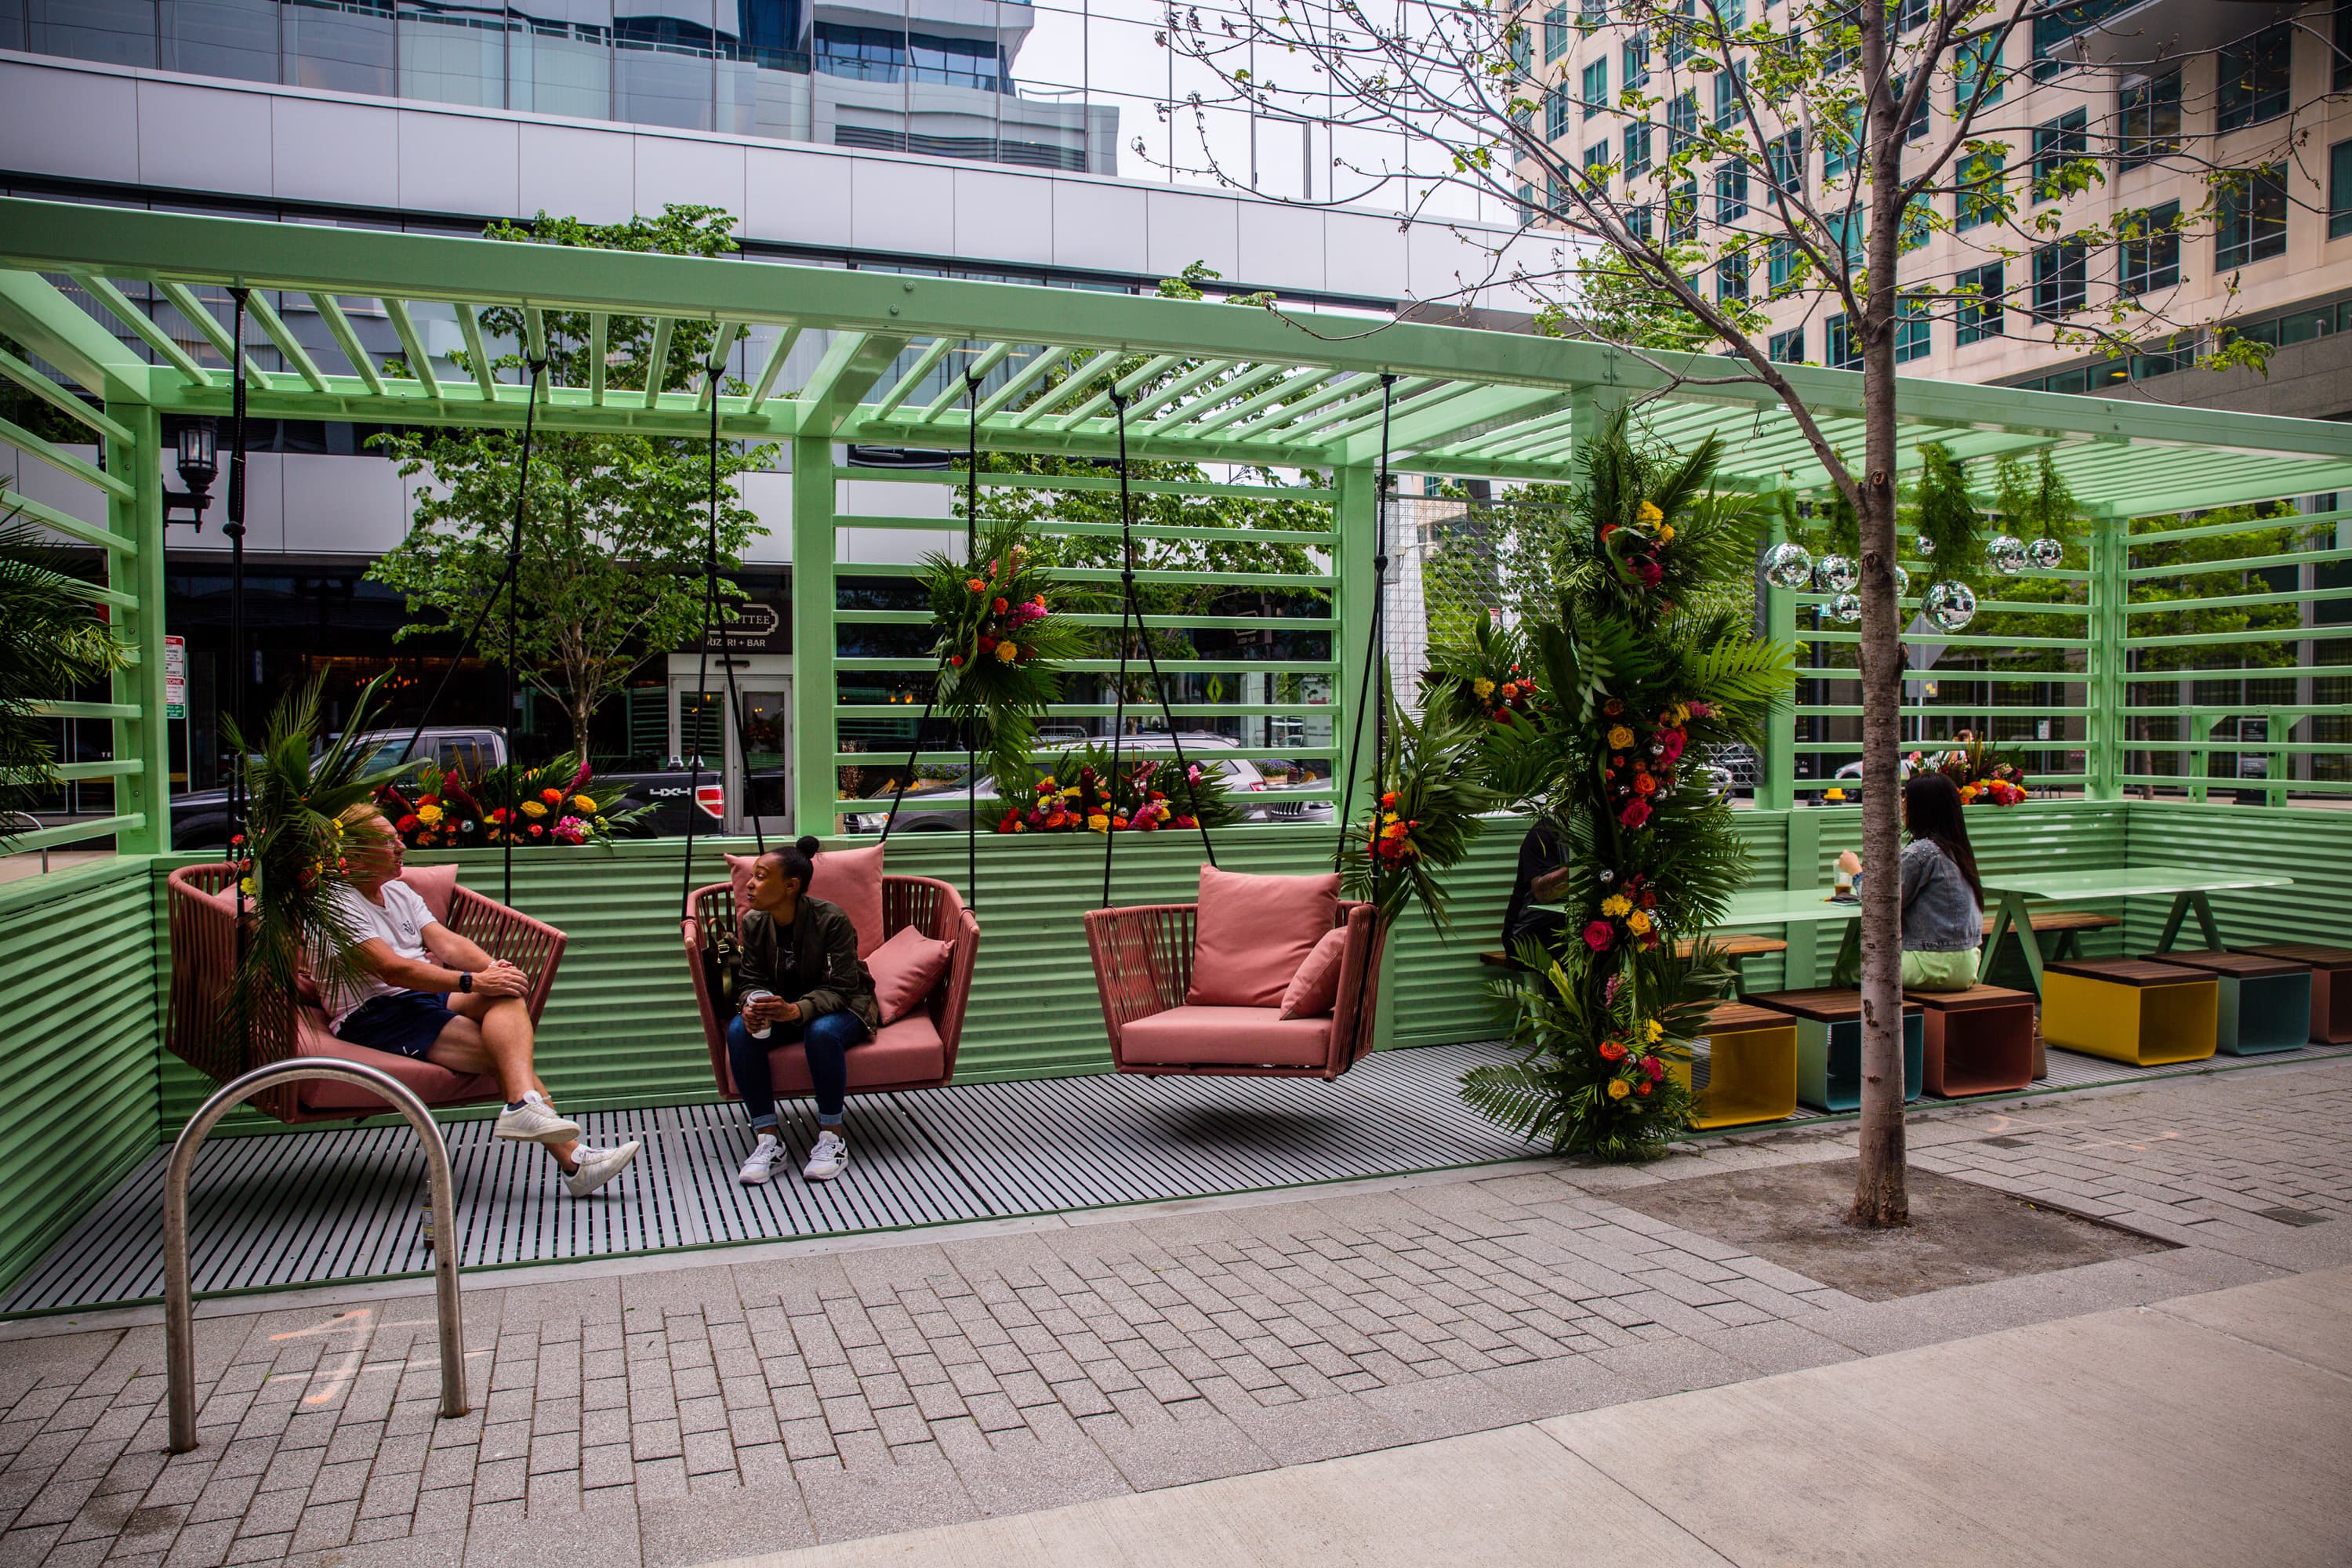 WS Development has installed several &quot;parklets&quot; on its properties in the Seaport. (Boston Seaport by WS Development)